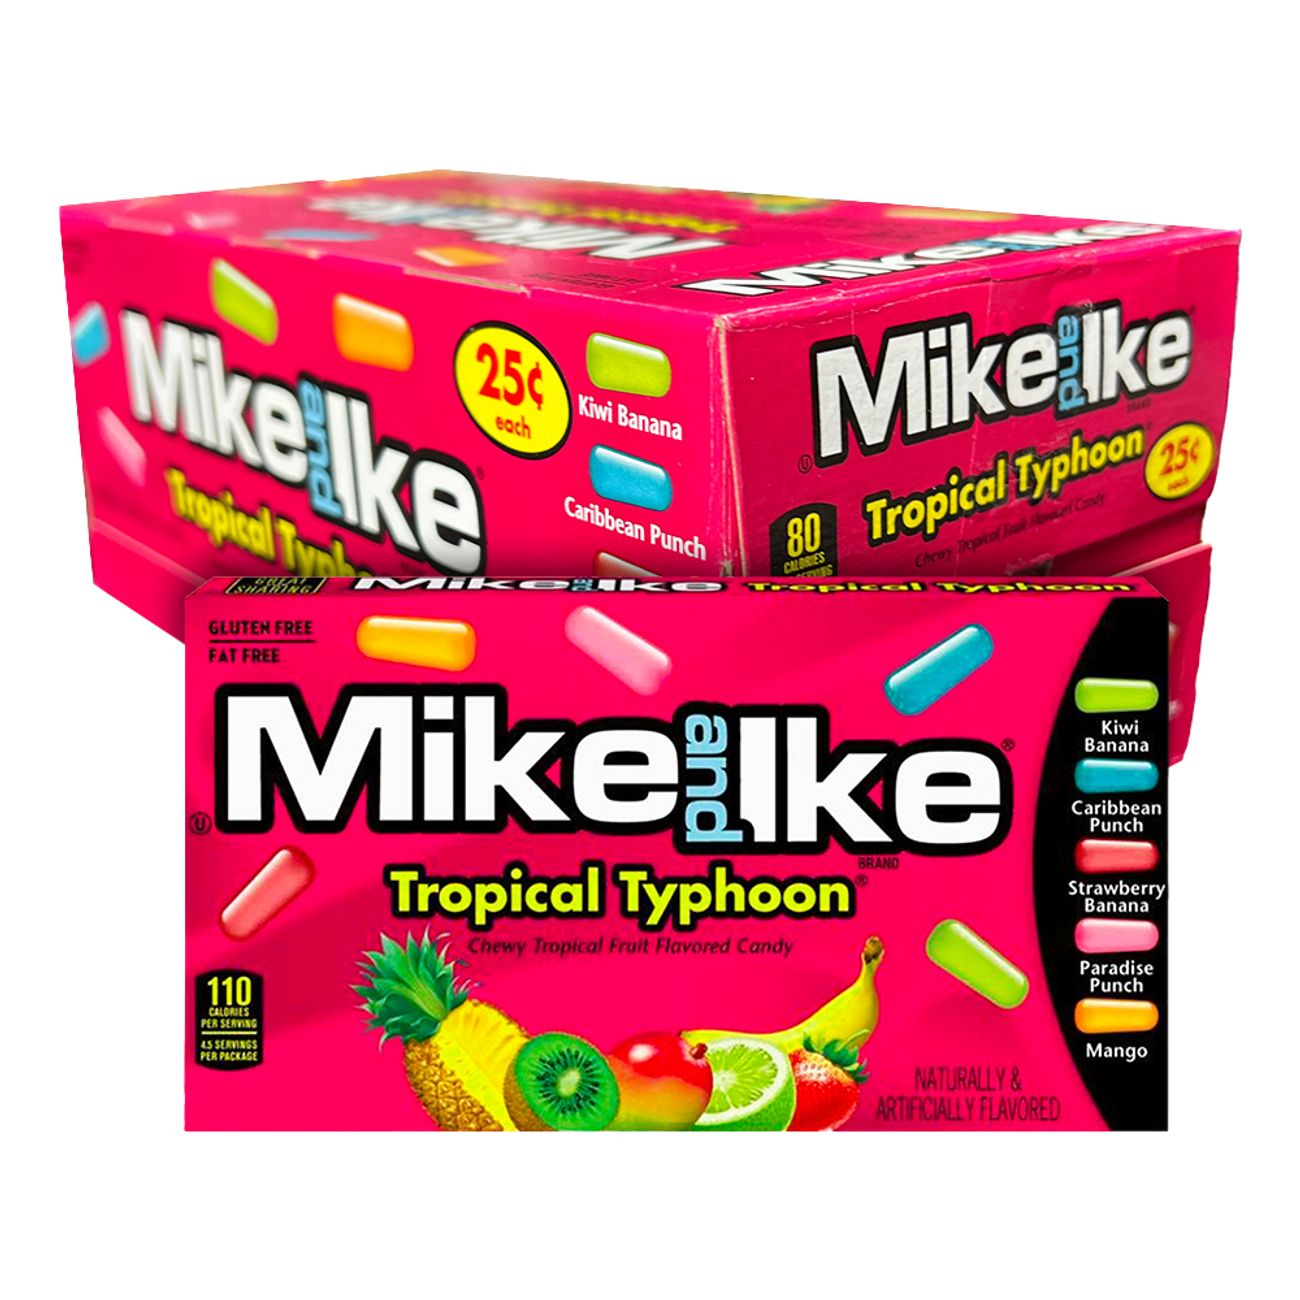 mike-and-ike-tropical-typhoon-storpack-99914-2